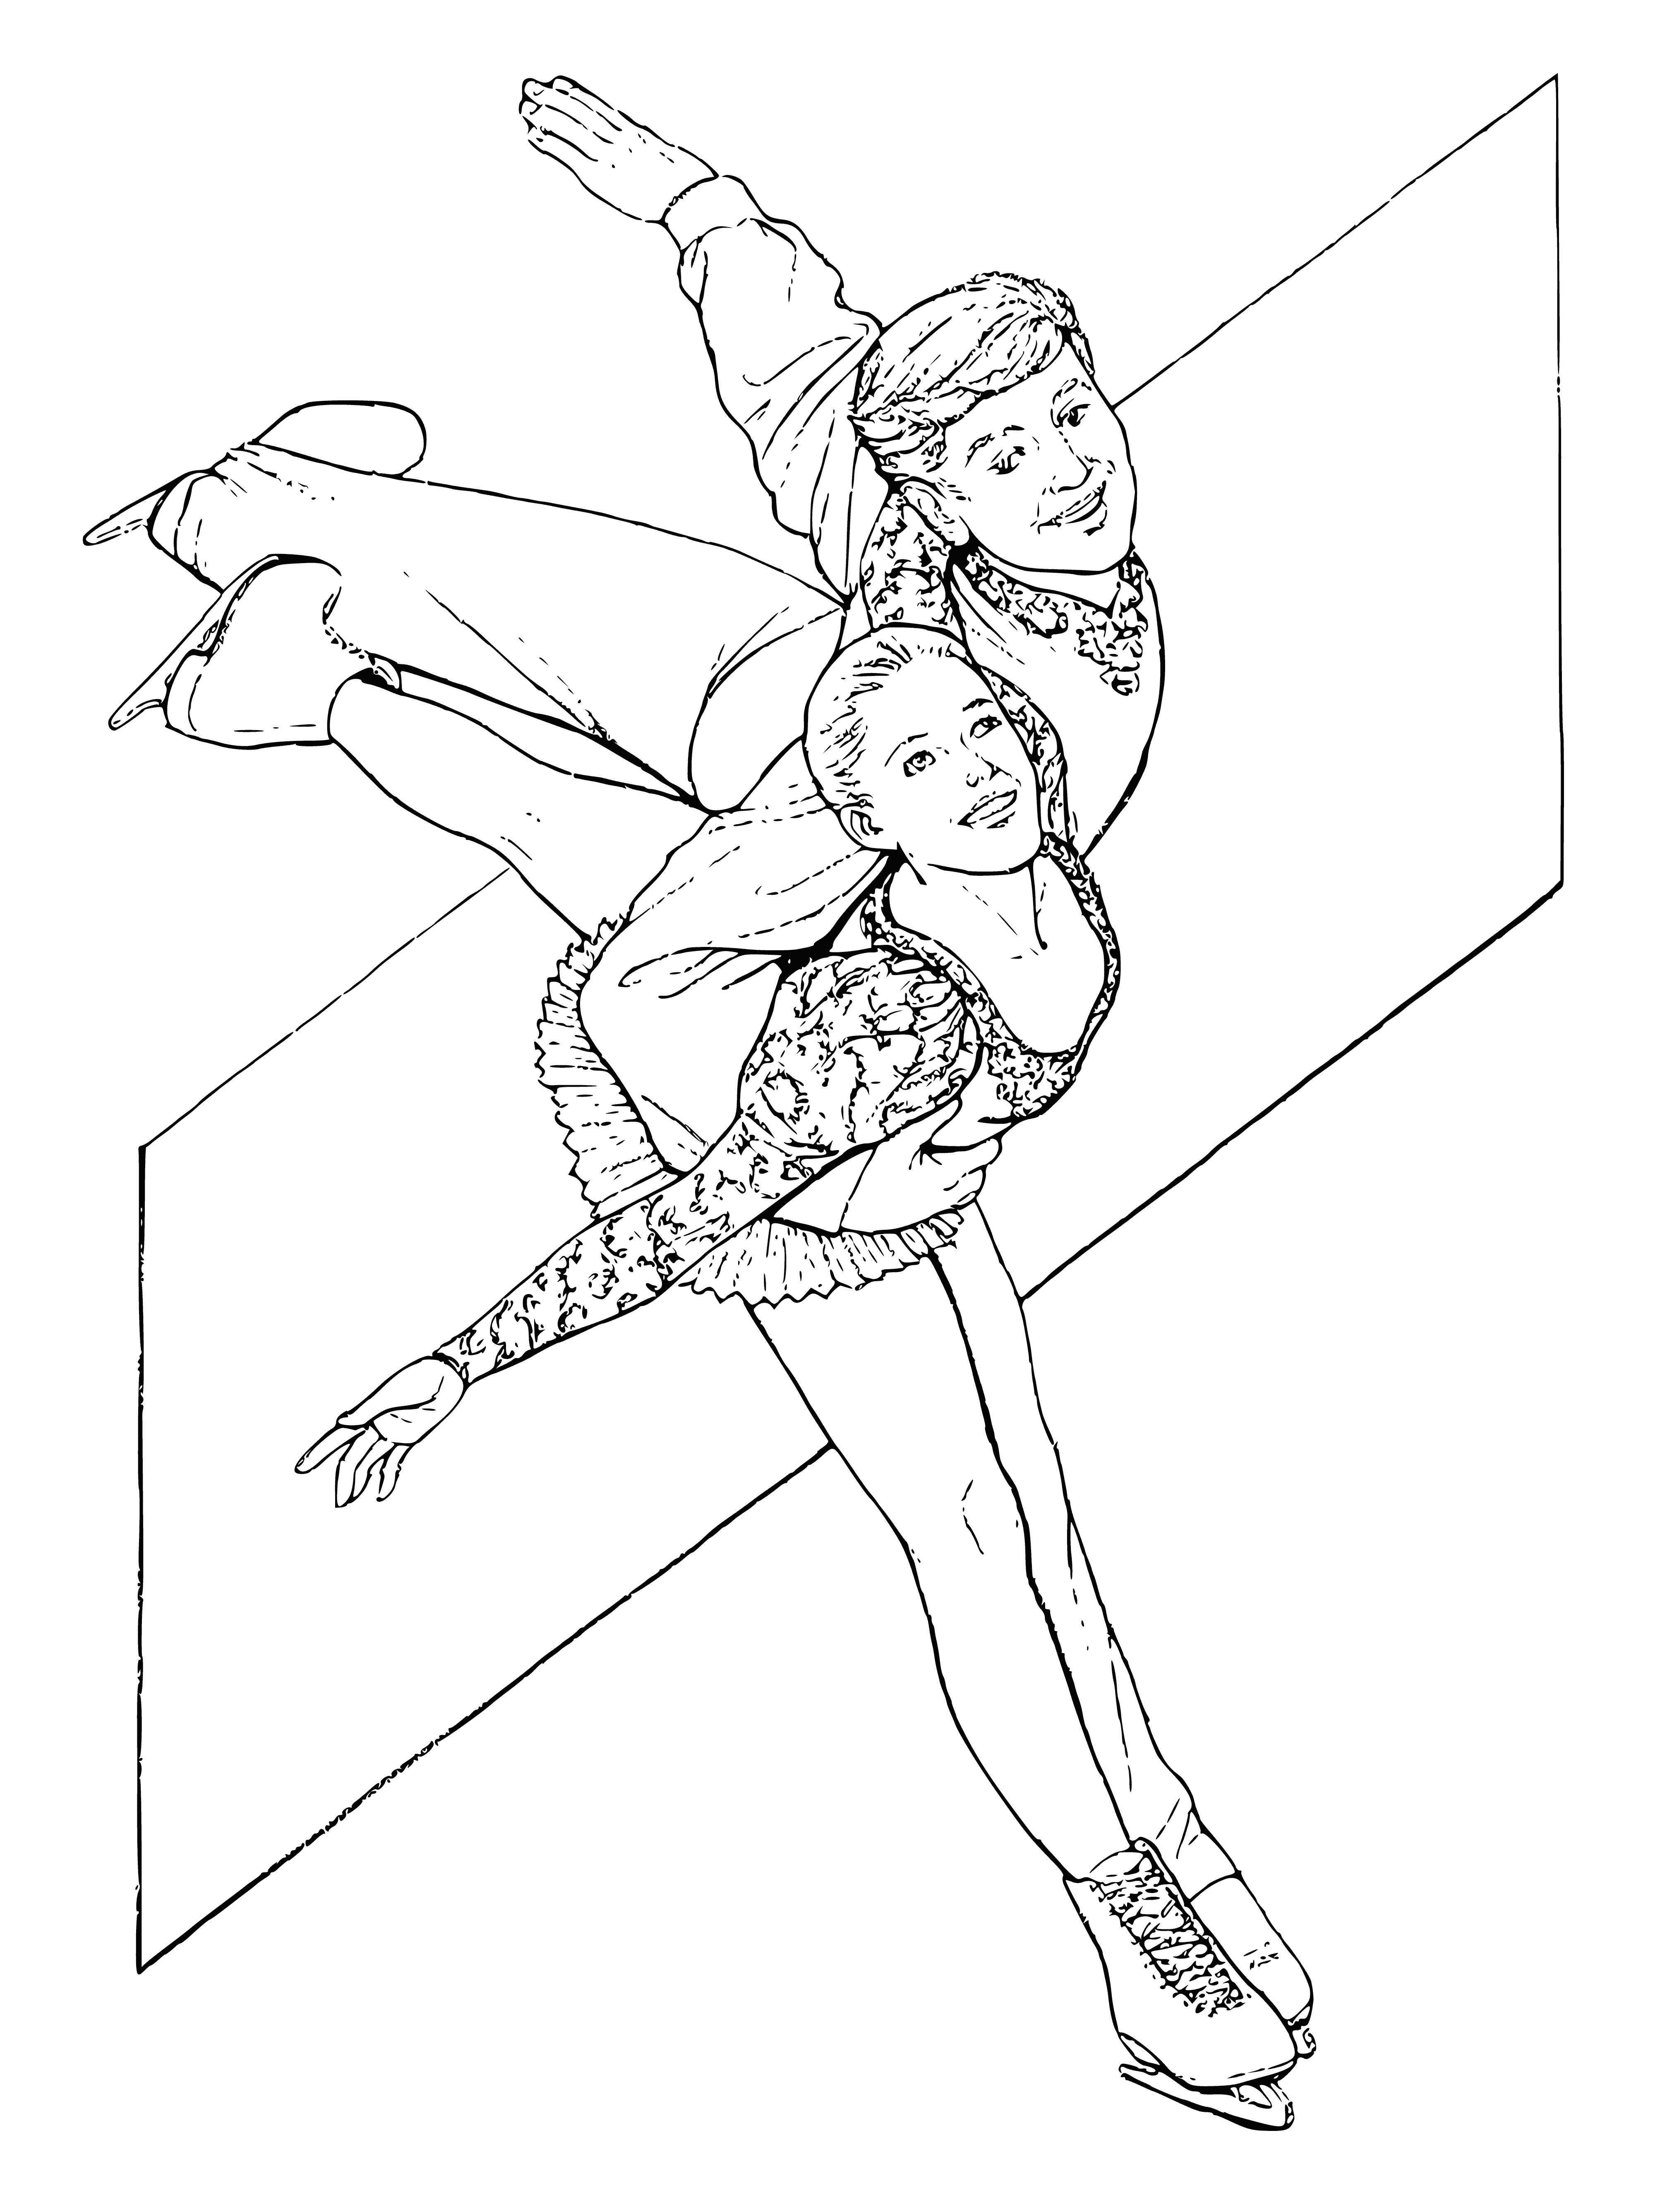 coloring page: Two people skating gracefully around the rink, hand-in-hand, in brightly coloured outfits.